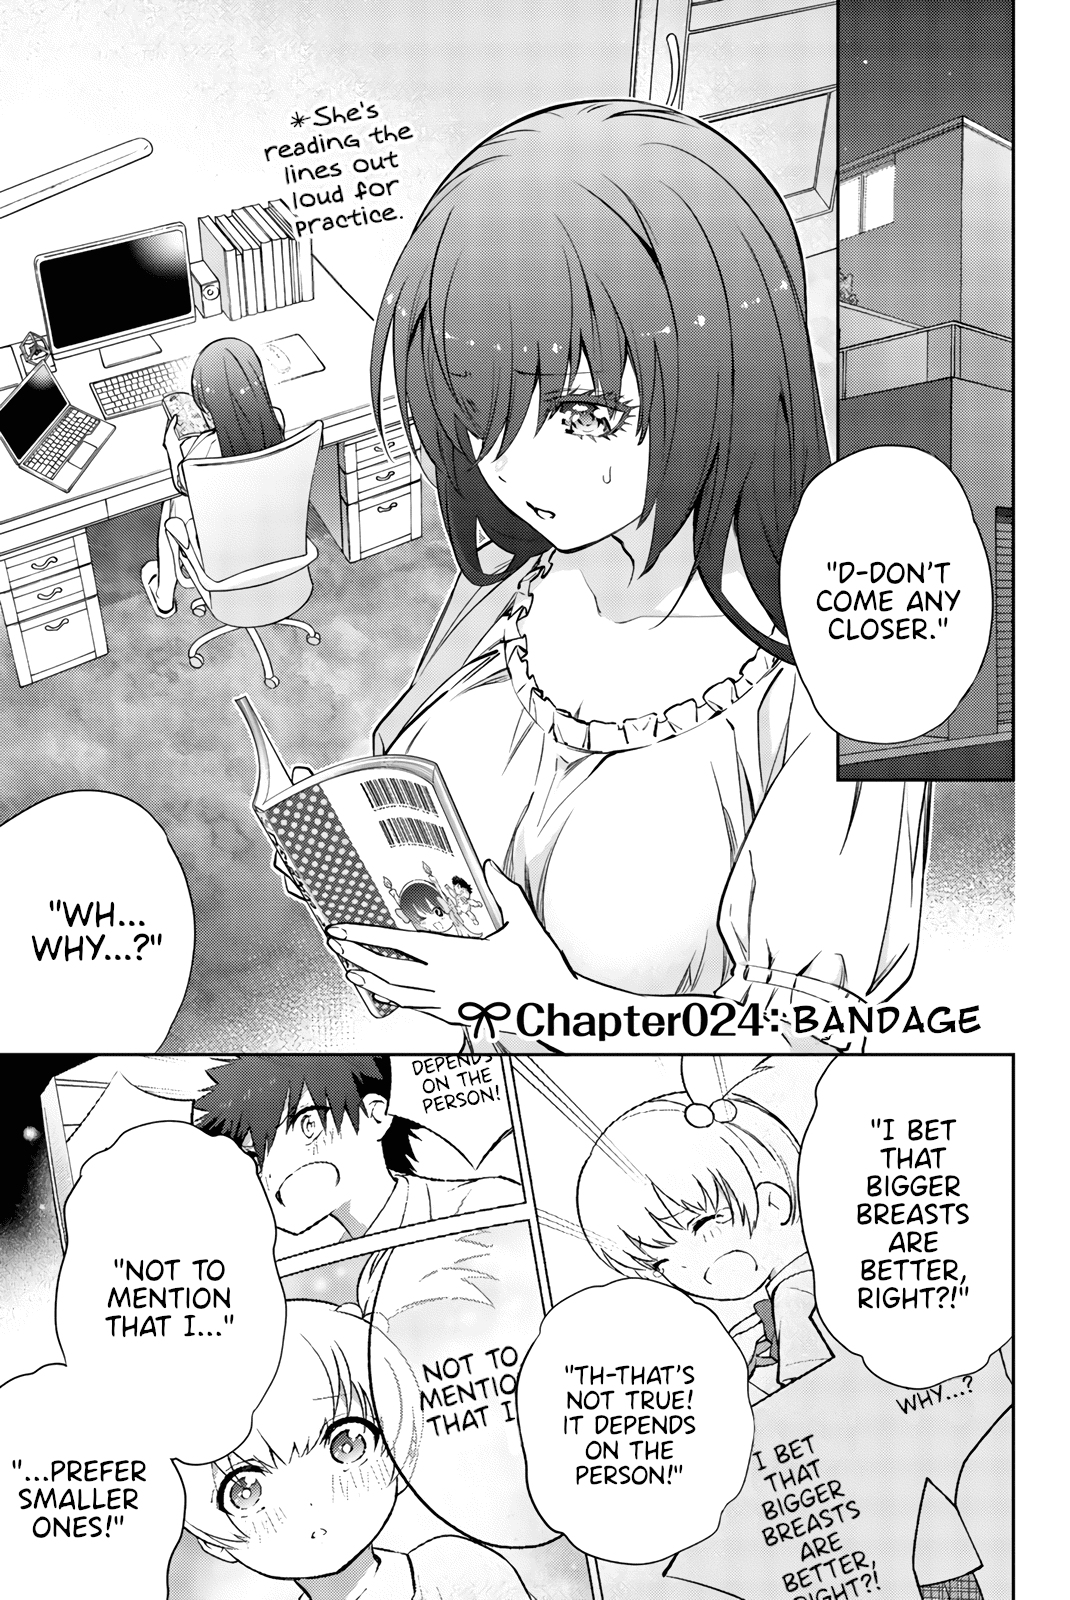 My Senpai Is After My Life - Page 1